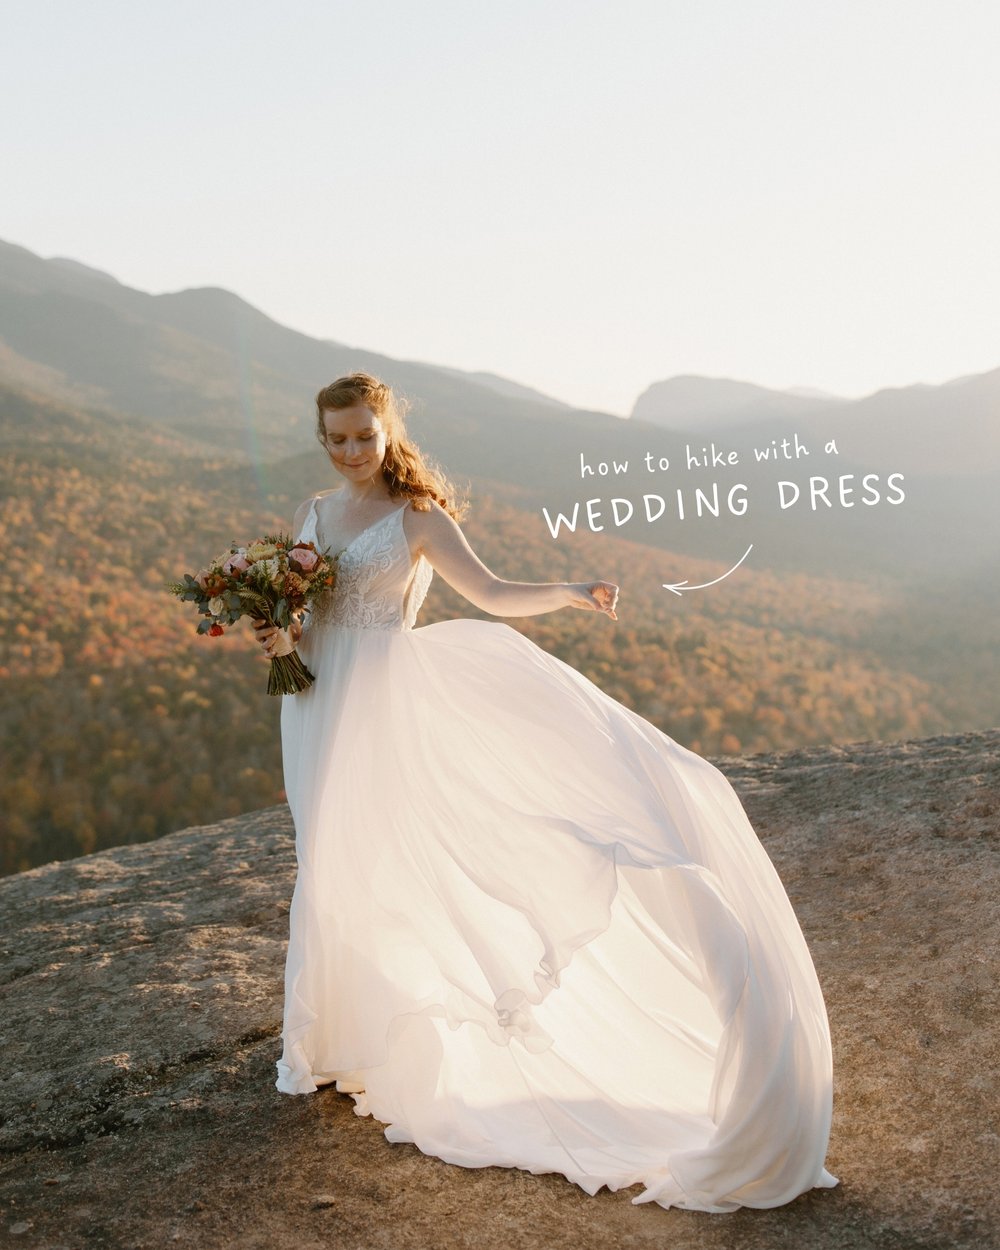 how-to-hike-with-wedding-dress-elopement-1.jpg